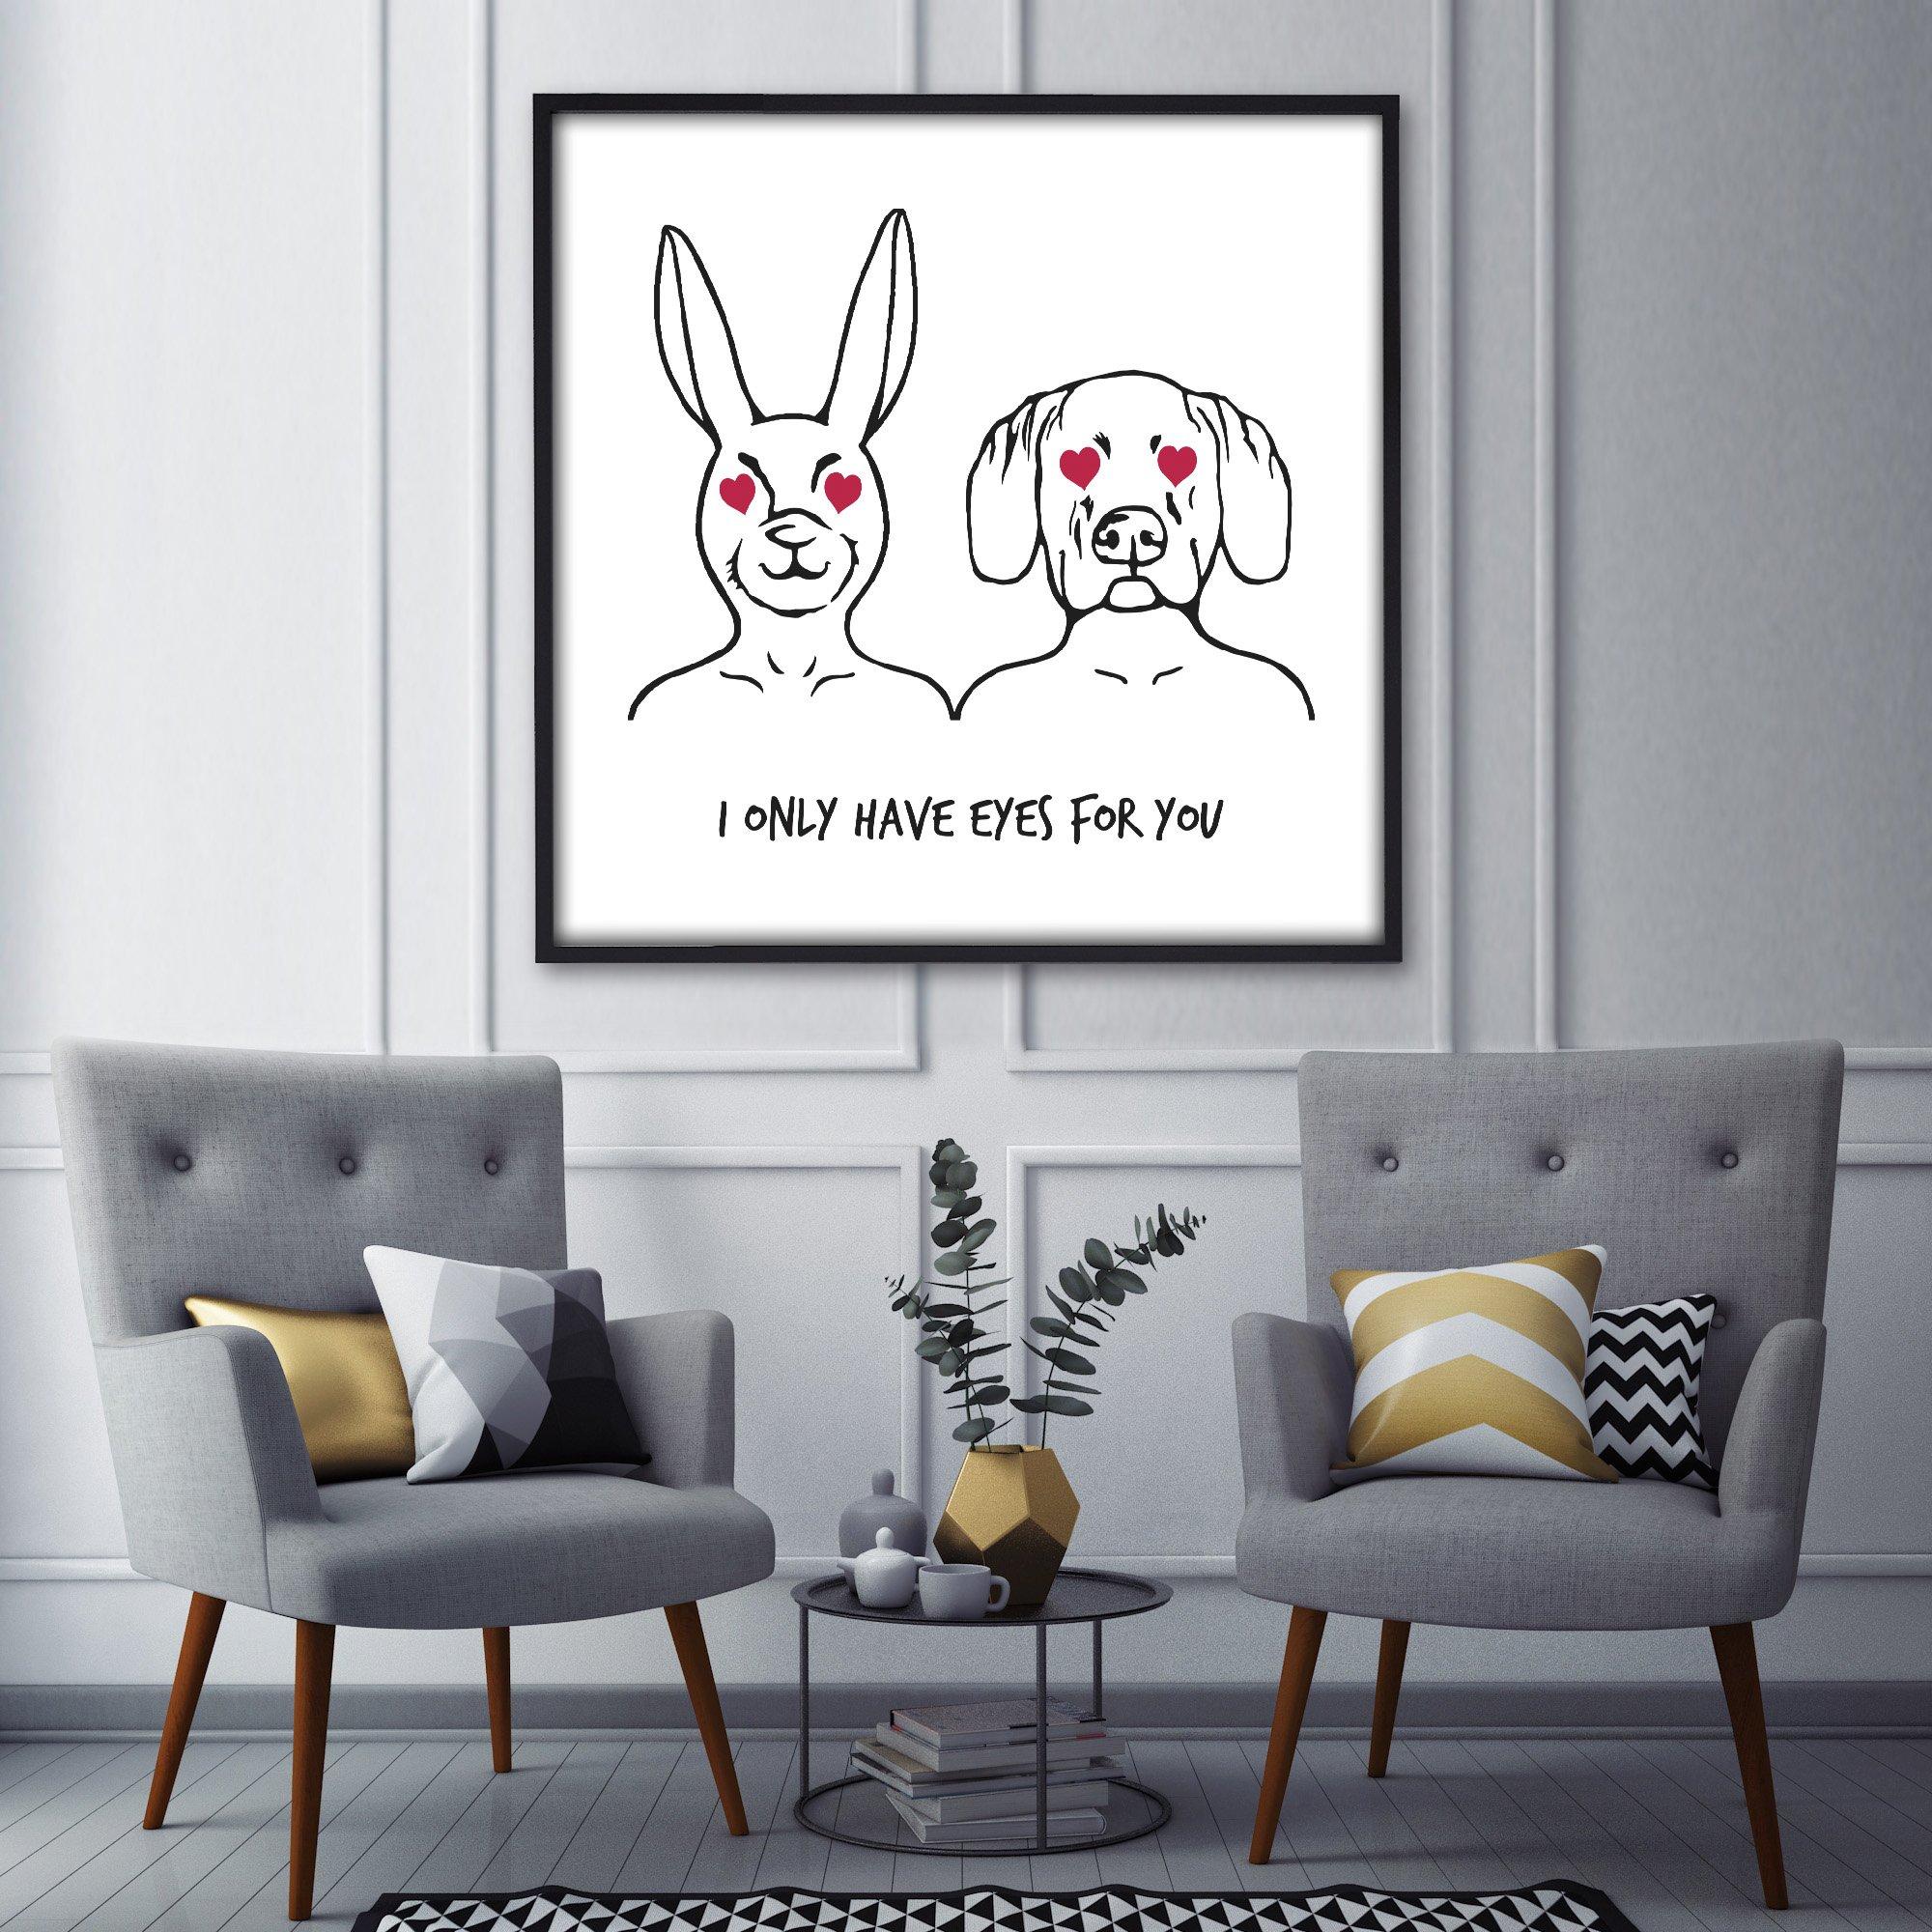 Print - Gillie and Marc - Art - Limited Edition - Love - Equality - Eyes for You